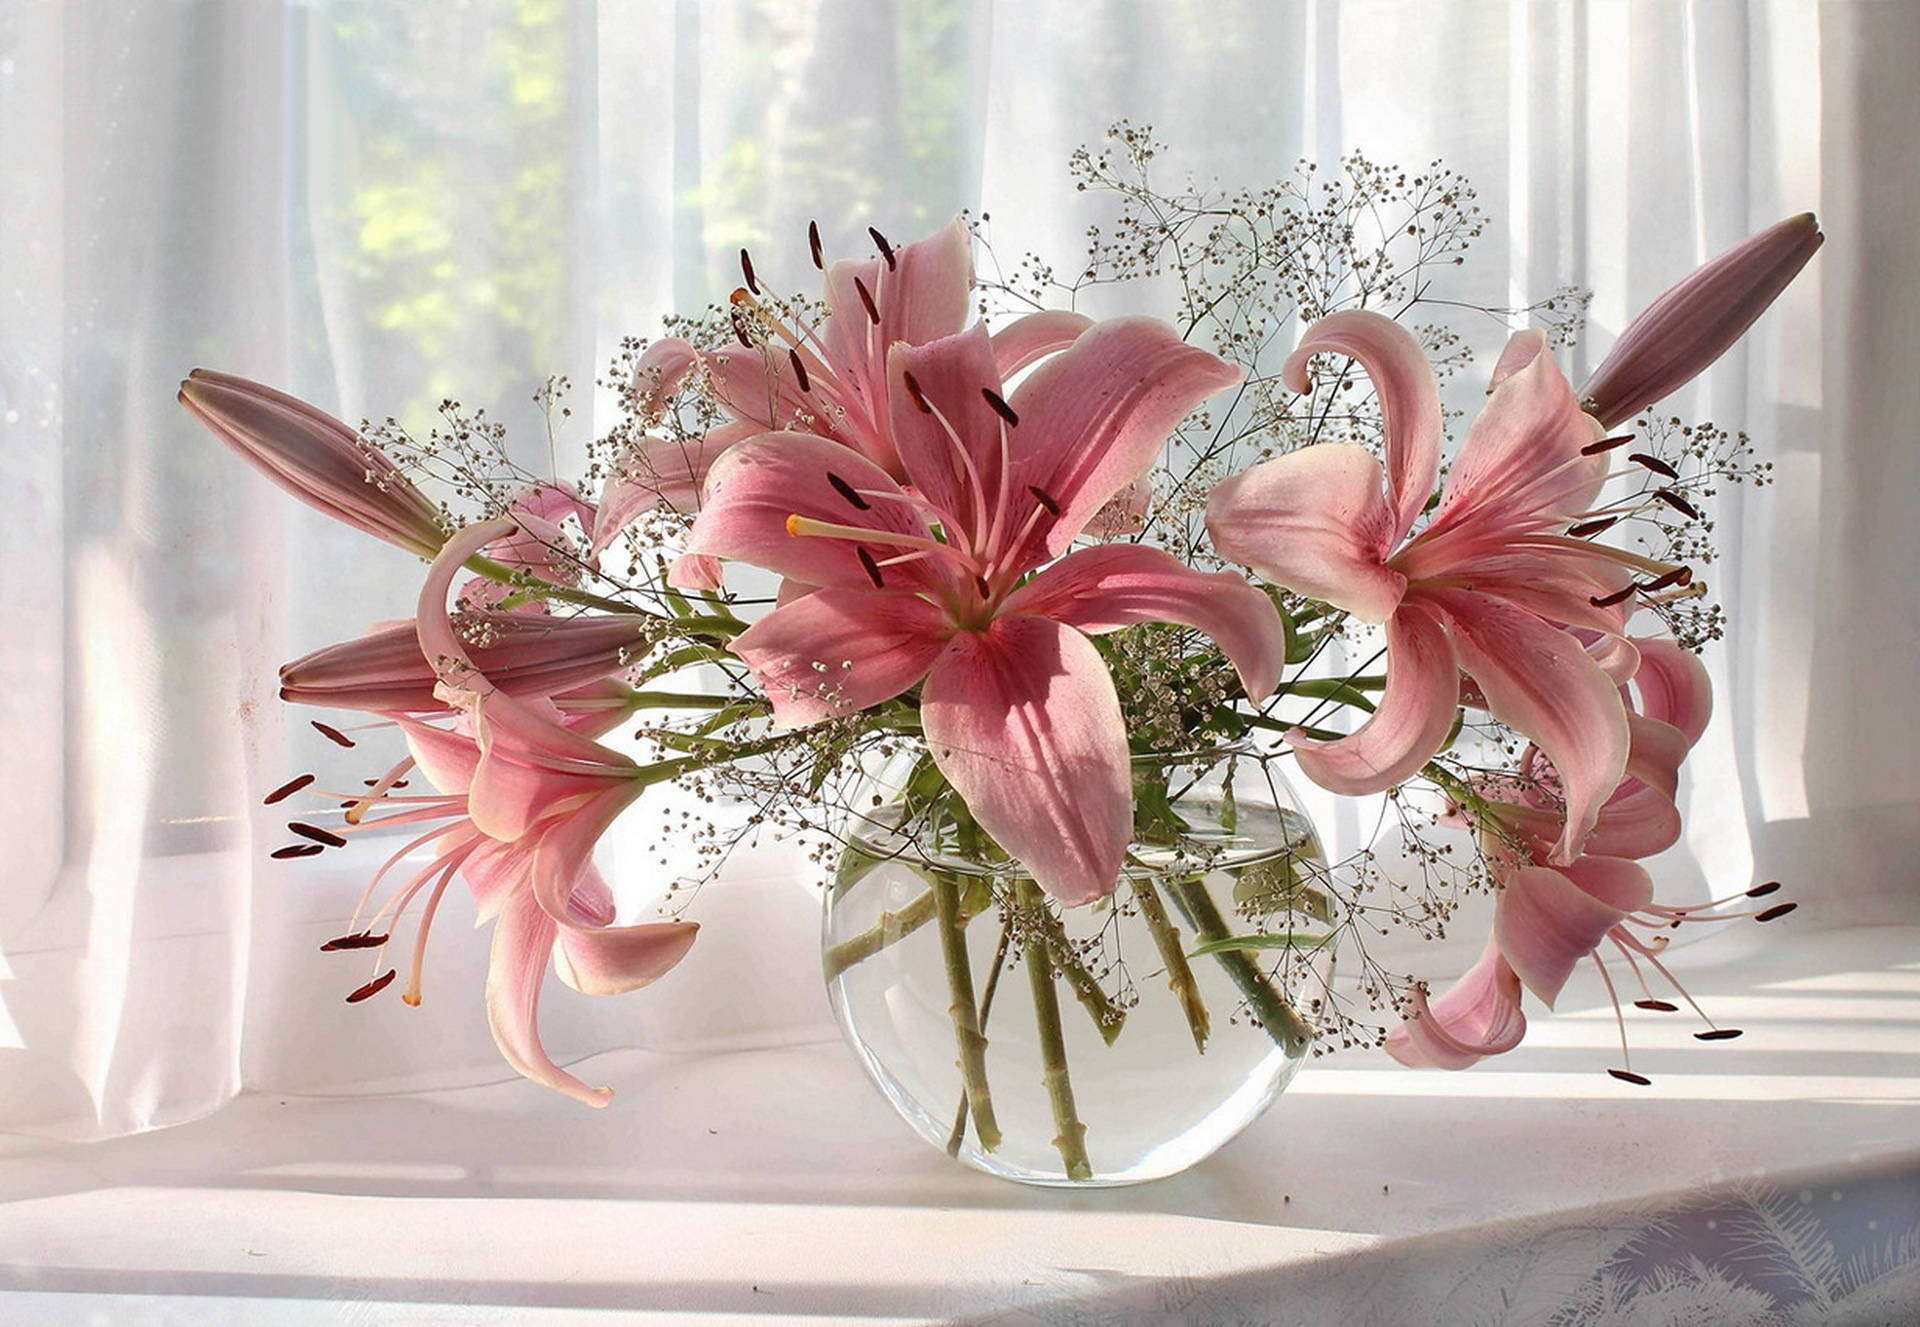 Lovely Pink Lilies Captured in a Beautiful Flower Vase Wallpaper